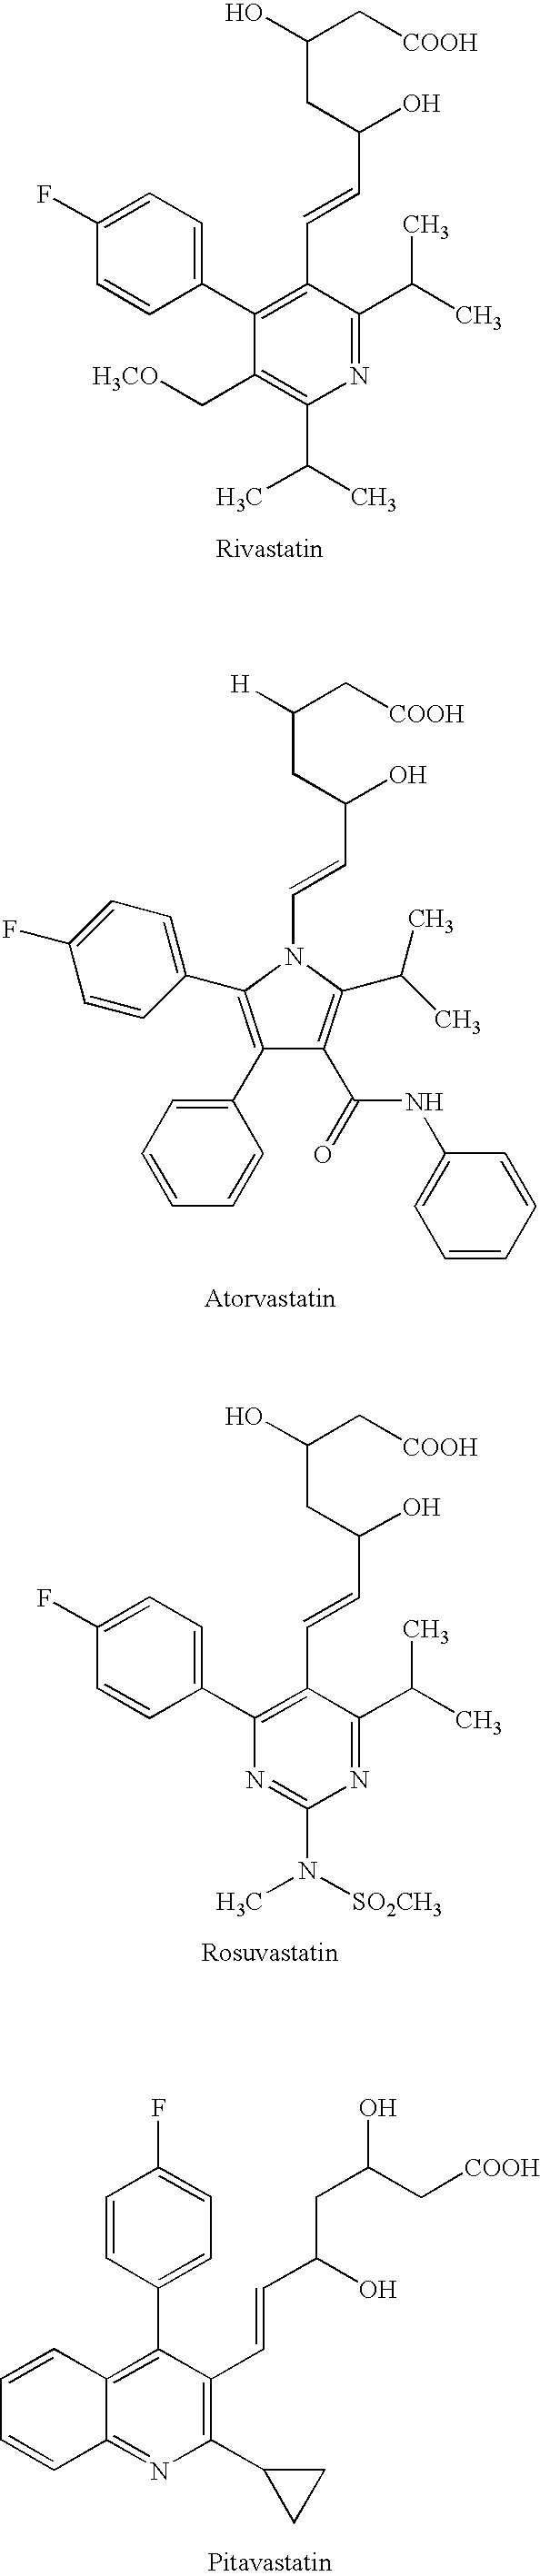 Medicinal composition containing an HMG-CoA reductase inhibitor